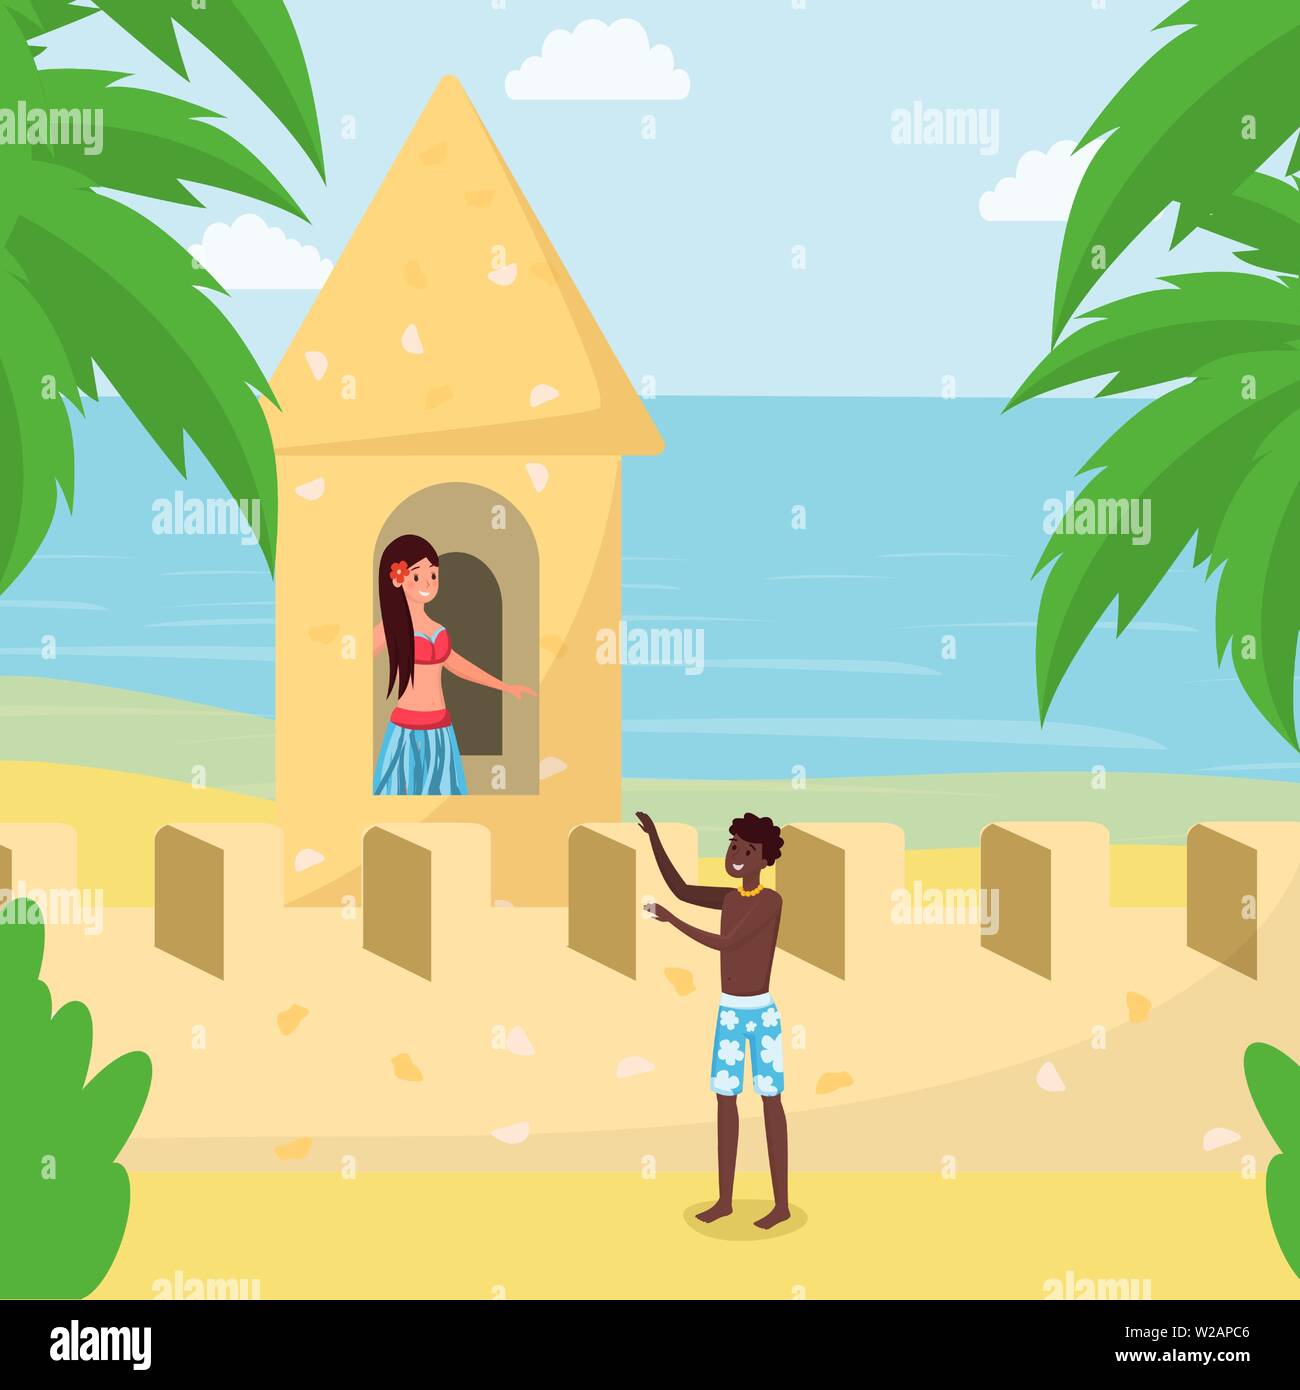 Boyfriend saving girlfriend from sand castle. Amazing sandcastle, sculpture on ocean, sea shore of tropical island cartoon vector illustration. Having fun, spending time with friends on vacation Stock Vector